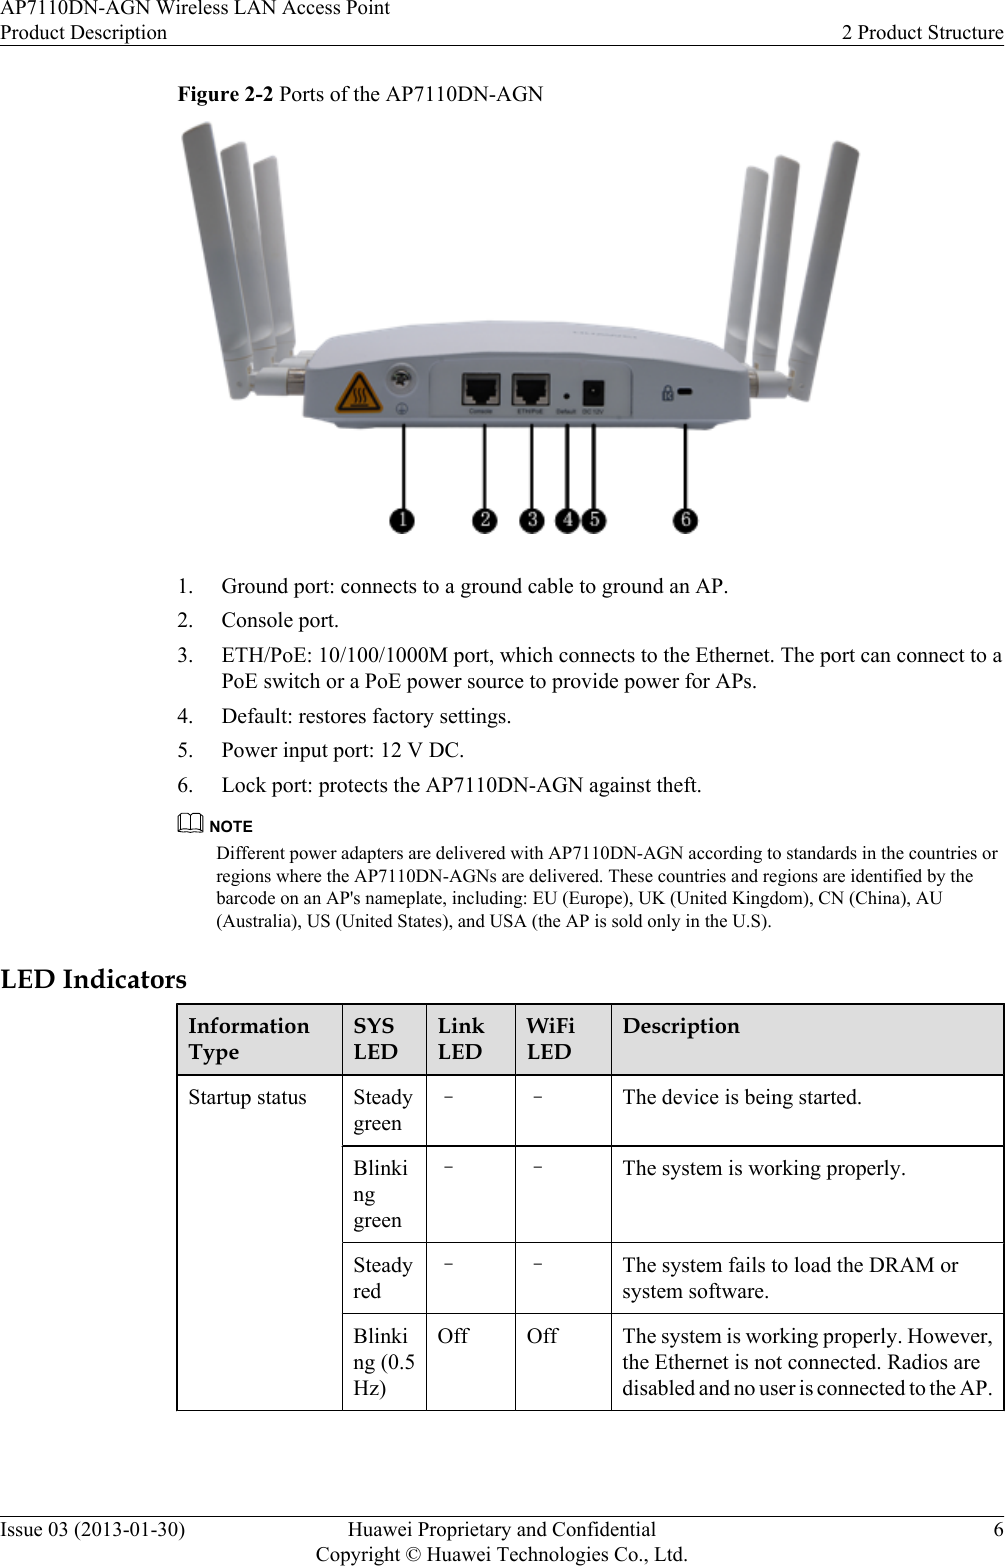 Figure 2-2 Ports of the AP7110DN-AGN1. Ground port: connects to a ground cable to ground an AP.2. Console port.3. ETH/PoE: 10/100/1000M port, which connects to the Ethernet. The port can connect to aPoE switch or a PoE power source to provide power for APs.4. Default: restores factory settings.5. Power input port: 12 V DC.6. Lock port: protects the AP7110DN-AGN against theft.NOTEDifferent power adapters are delivered with AP7110DN-AGN according to standards in the countries orregions where the AP7110DN-AGNs are delivered. These countries and regions are identified by thebarcode on an AP&apos;s nameplate, including: EU (Europe), UK (United Kingdom), CN (China), AU(Australia), US (United States), and USA (the AP is sold only in the U.S).LED IndicatorsInformationTypeSYSLEDLinkLEDWiFiLEDDescriptionStartup status Steadygreen– – The device is being started.Blinkinggreen– – The system is working properly.Steadyred– – The system fails to load the DRAM orsystem software.Blinking (0.5Hz)Off Off The system is working properly. However,the Ethernet is not connected. Radios aredisabled and no user is connected to the AP.AP7110DN-AGN Wireless LAN Access PointProduct Description 2 Product StructureIssue 03 (2013-01-30) Huawei Proprietary and ConfidentialCopyright © Huawei Technologies Co., Ltd.6